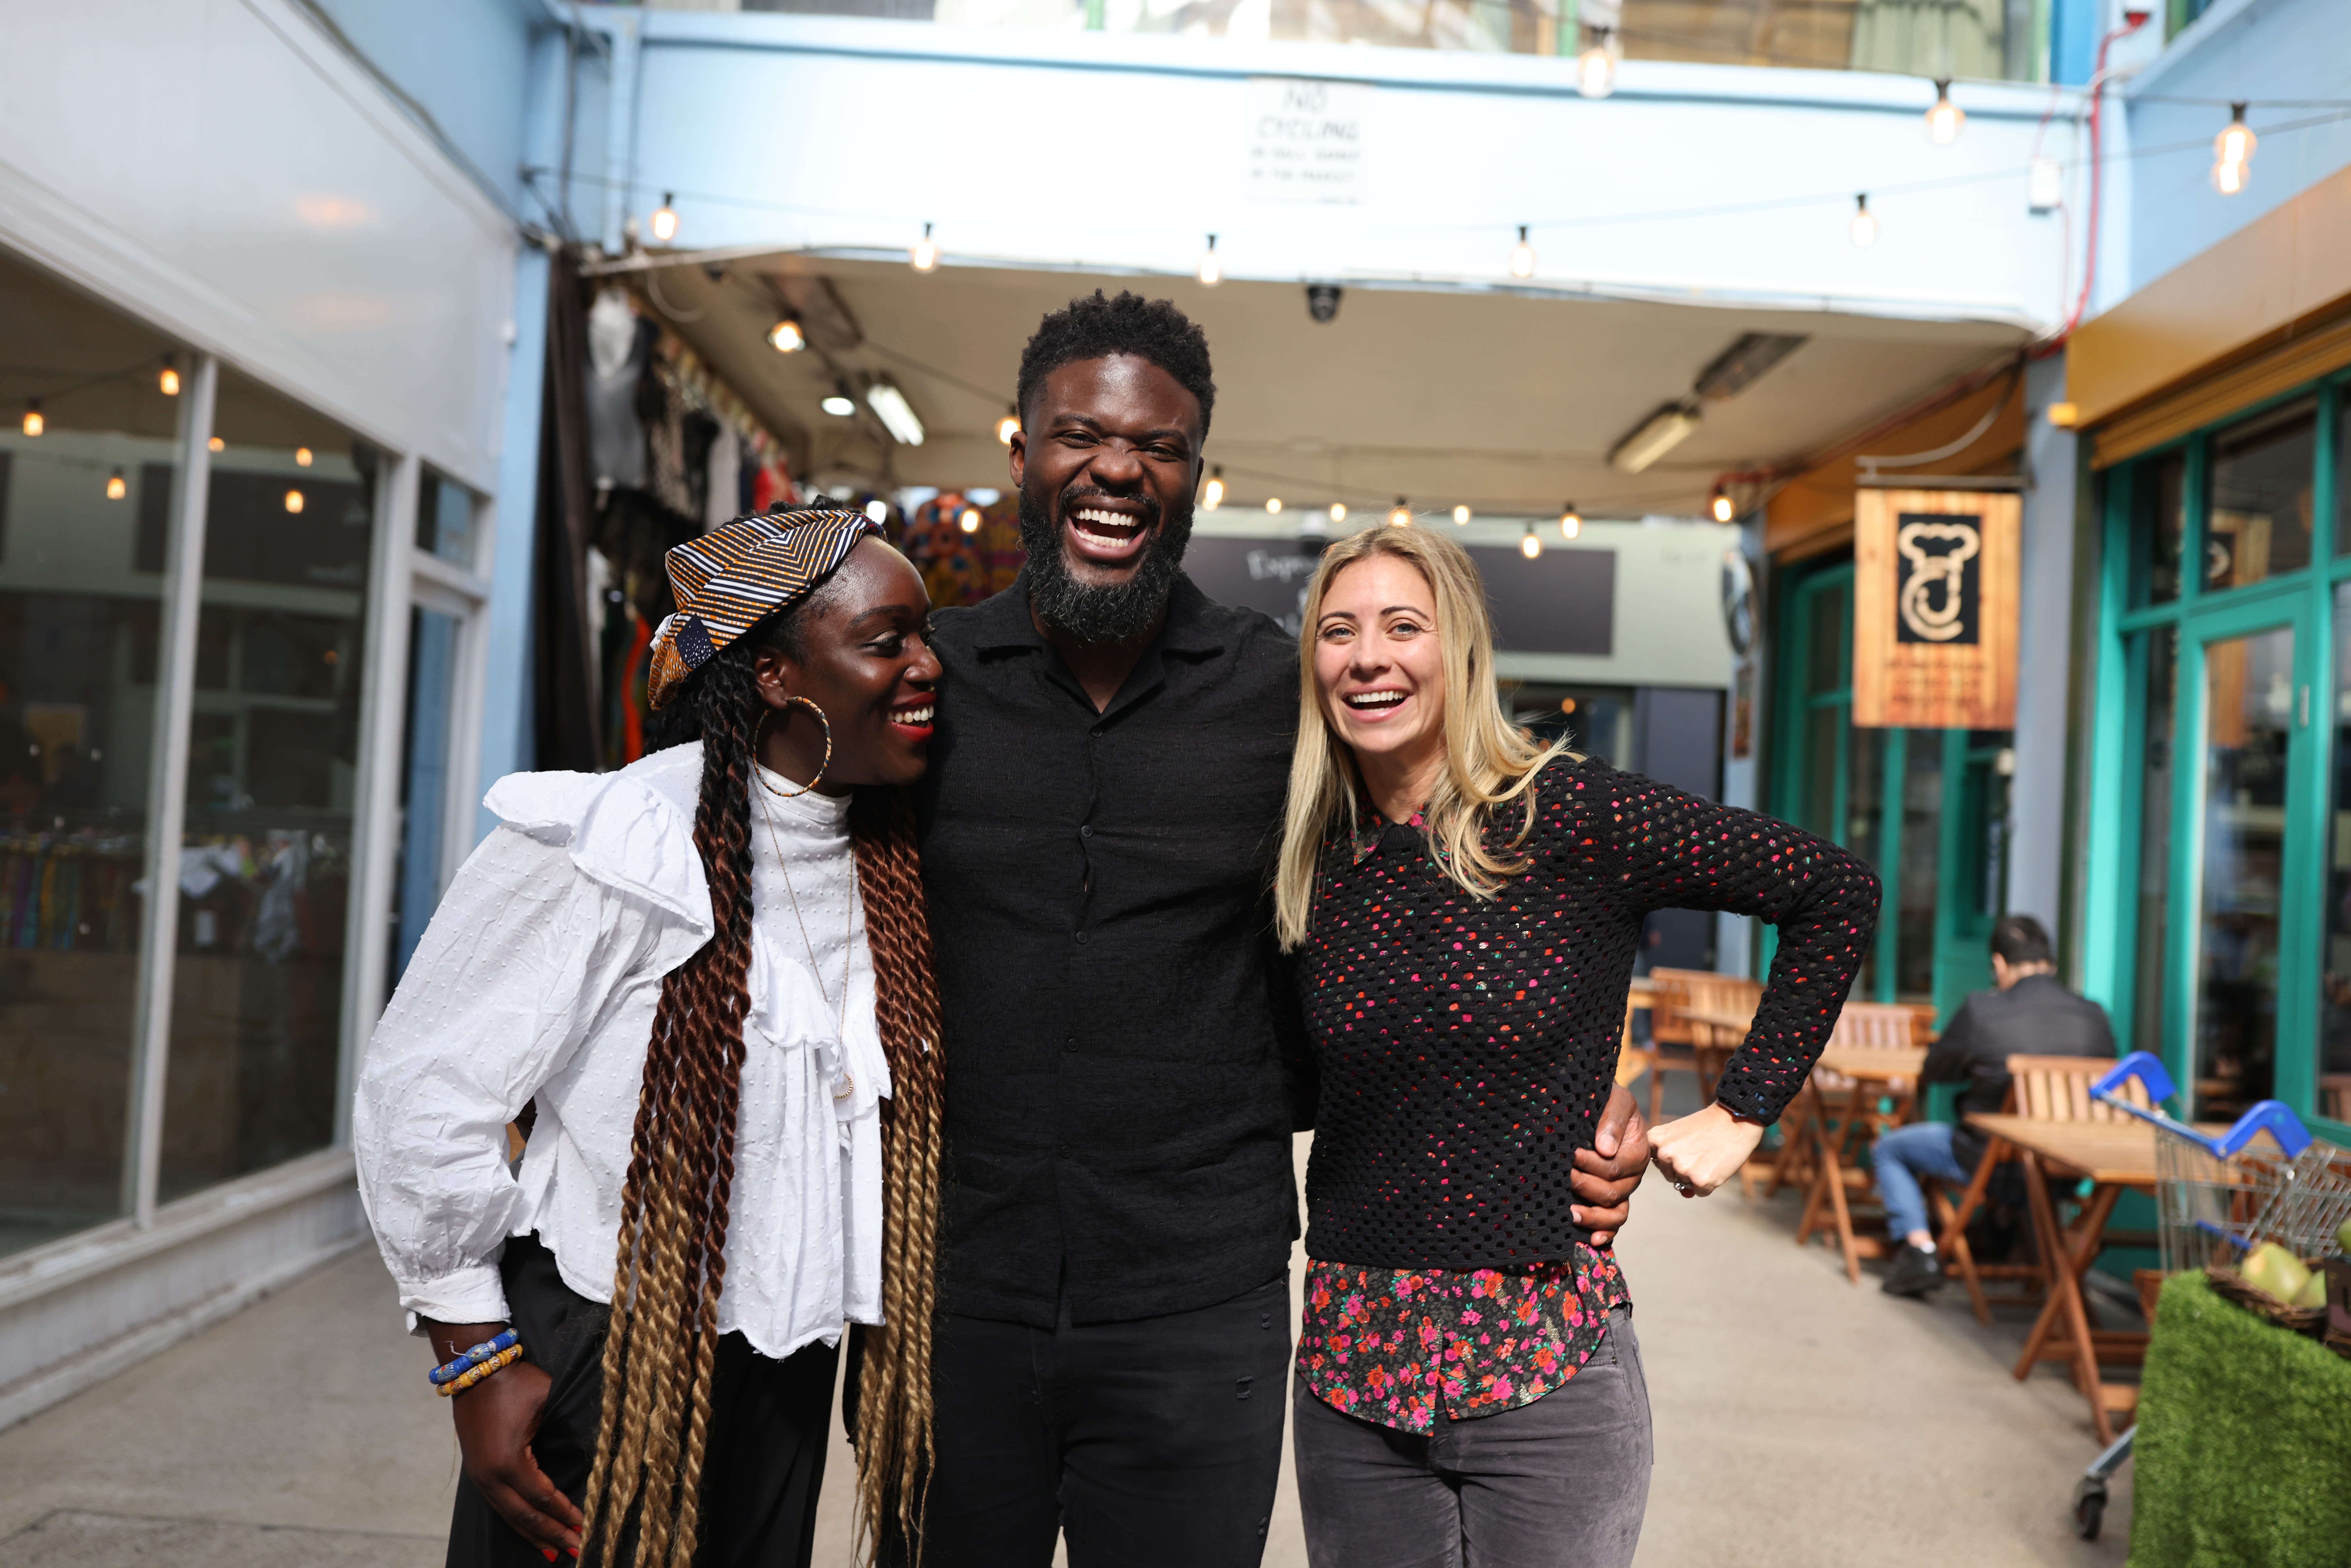 Holly Branson smiling with Karl Lokko and Lola Cawood of Black Seed Ventures and Tiwani Heritage in Brixton Village